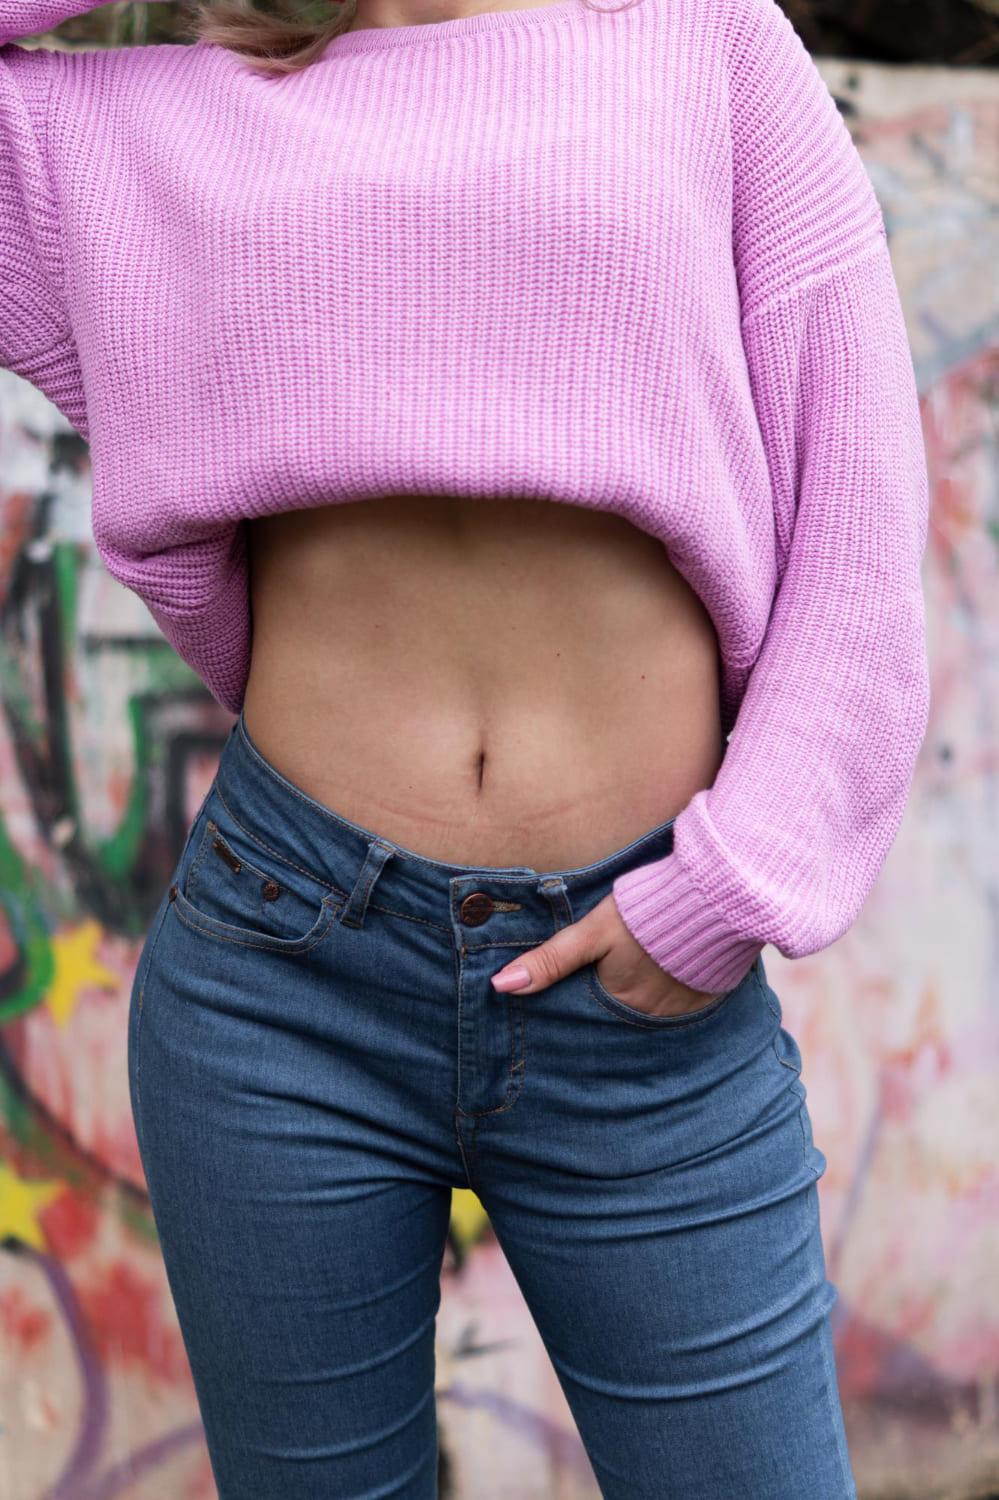 woman showing her belly button